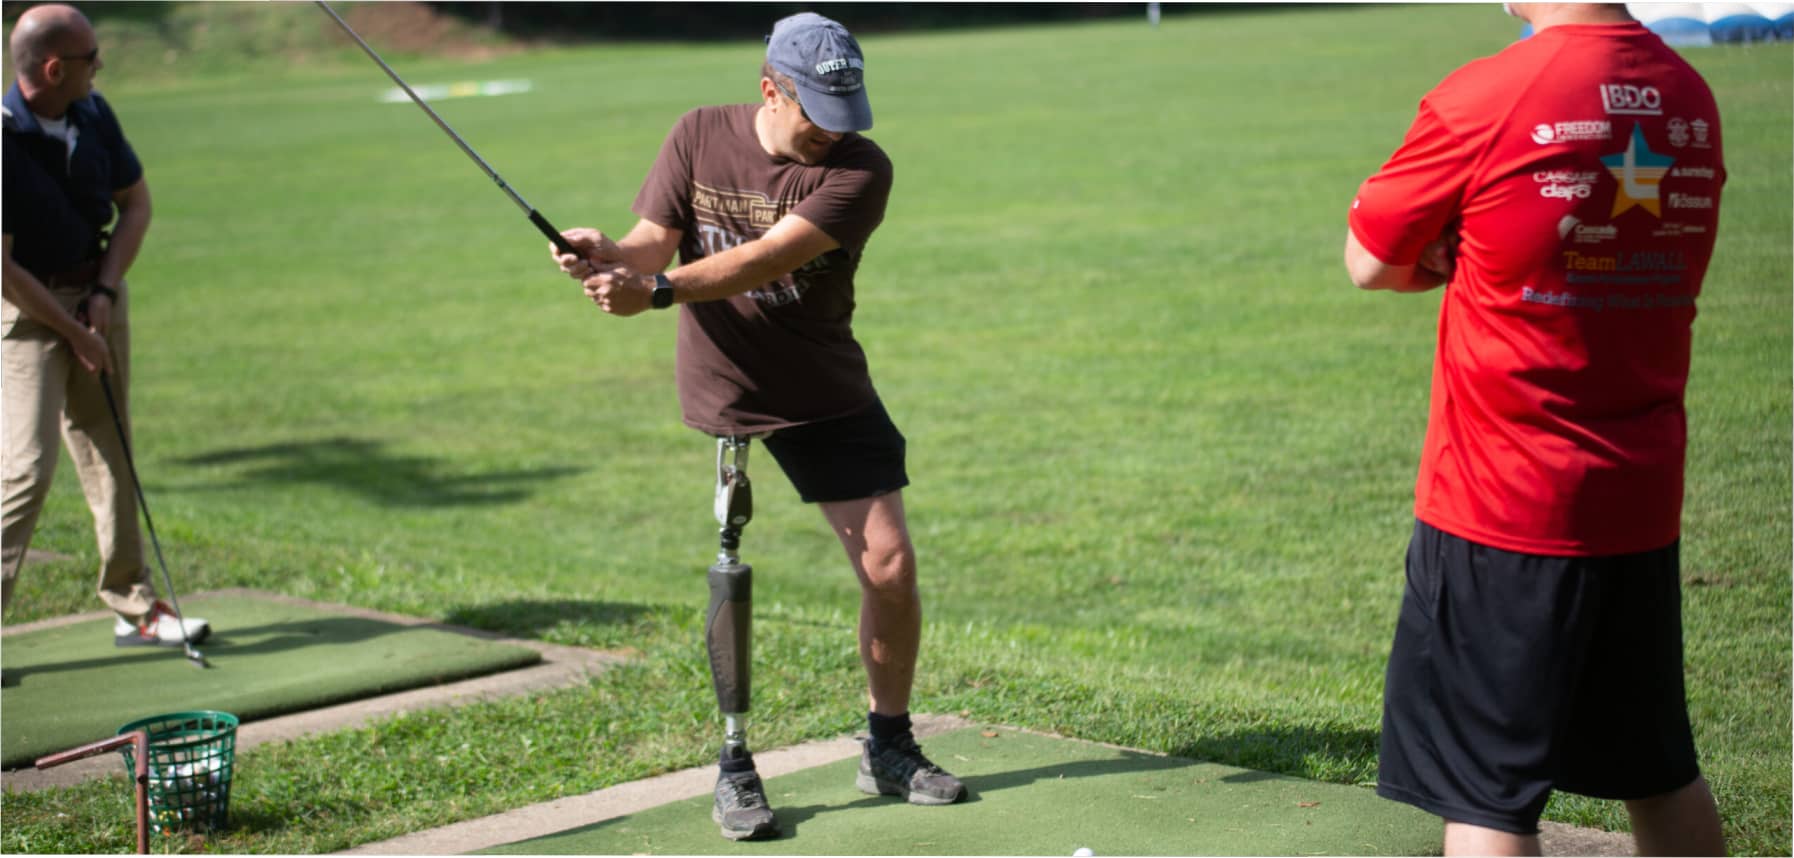 Picture of a man with prosthetic leg playing golf | Lawall Prosthetic & Orthotic Services